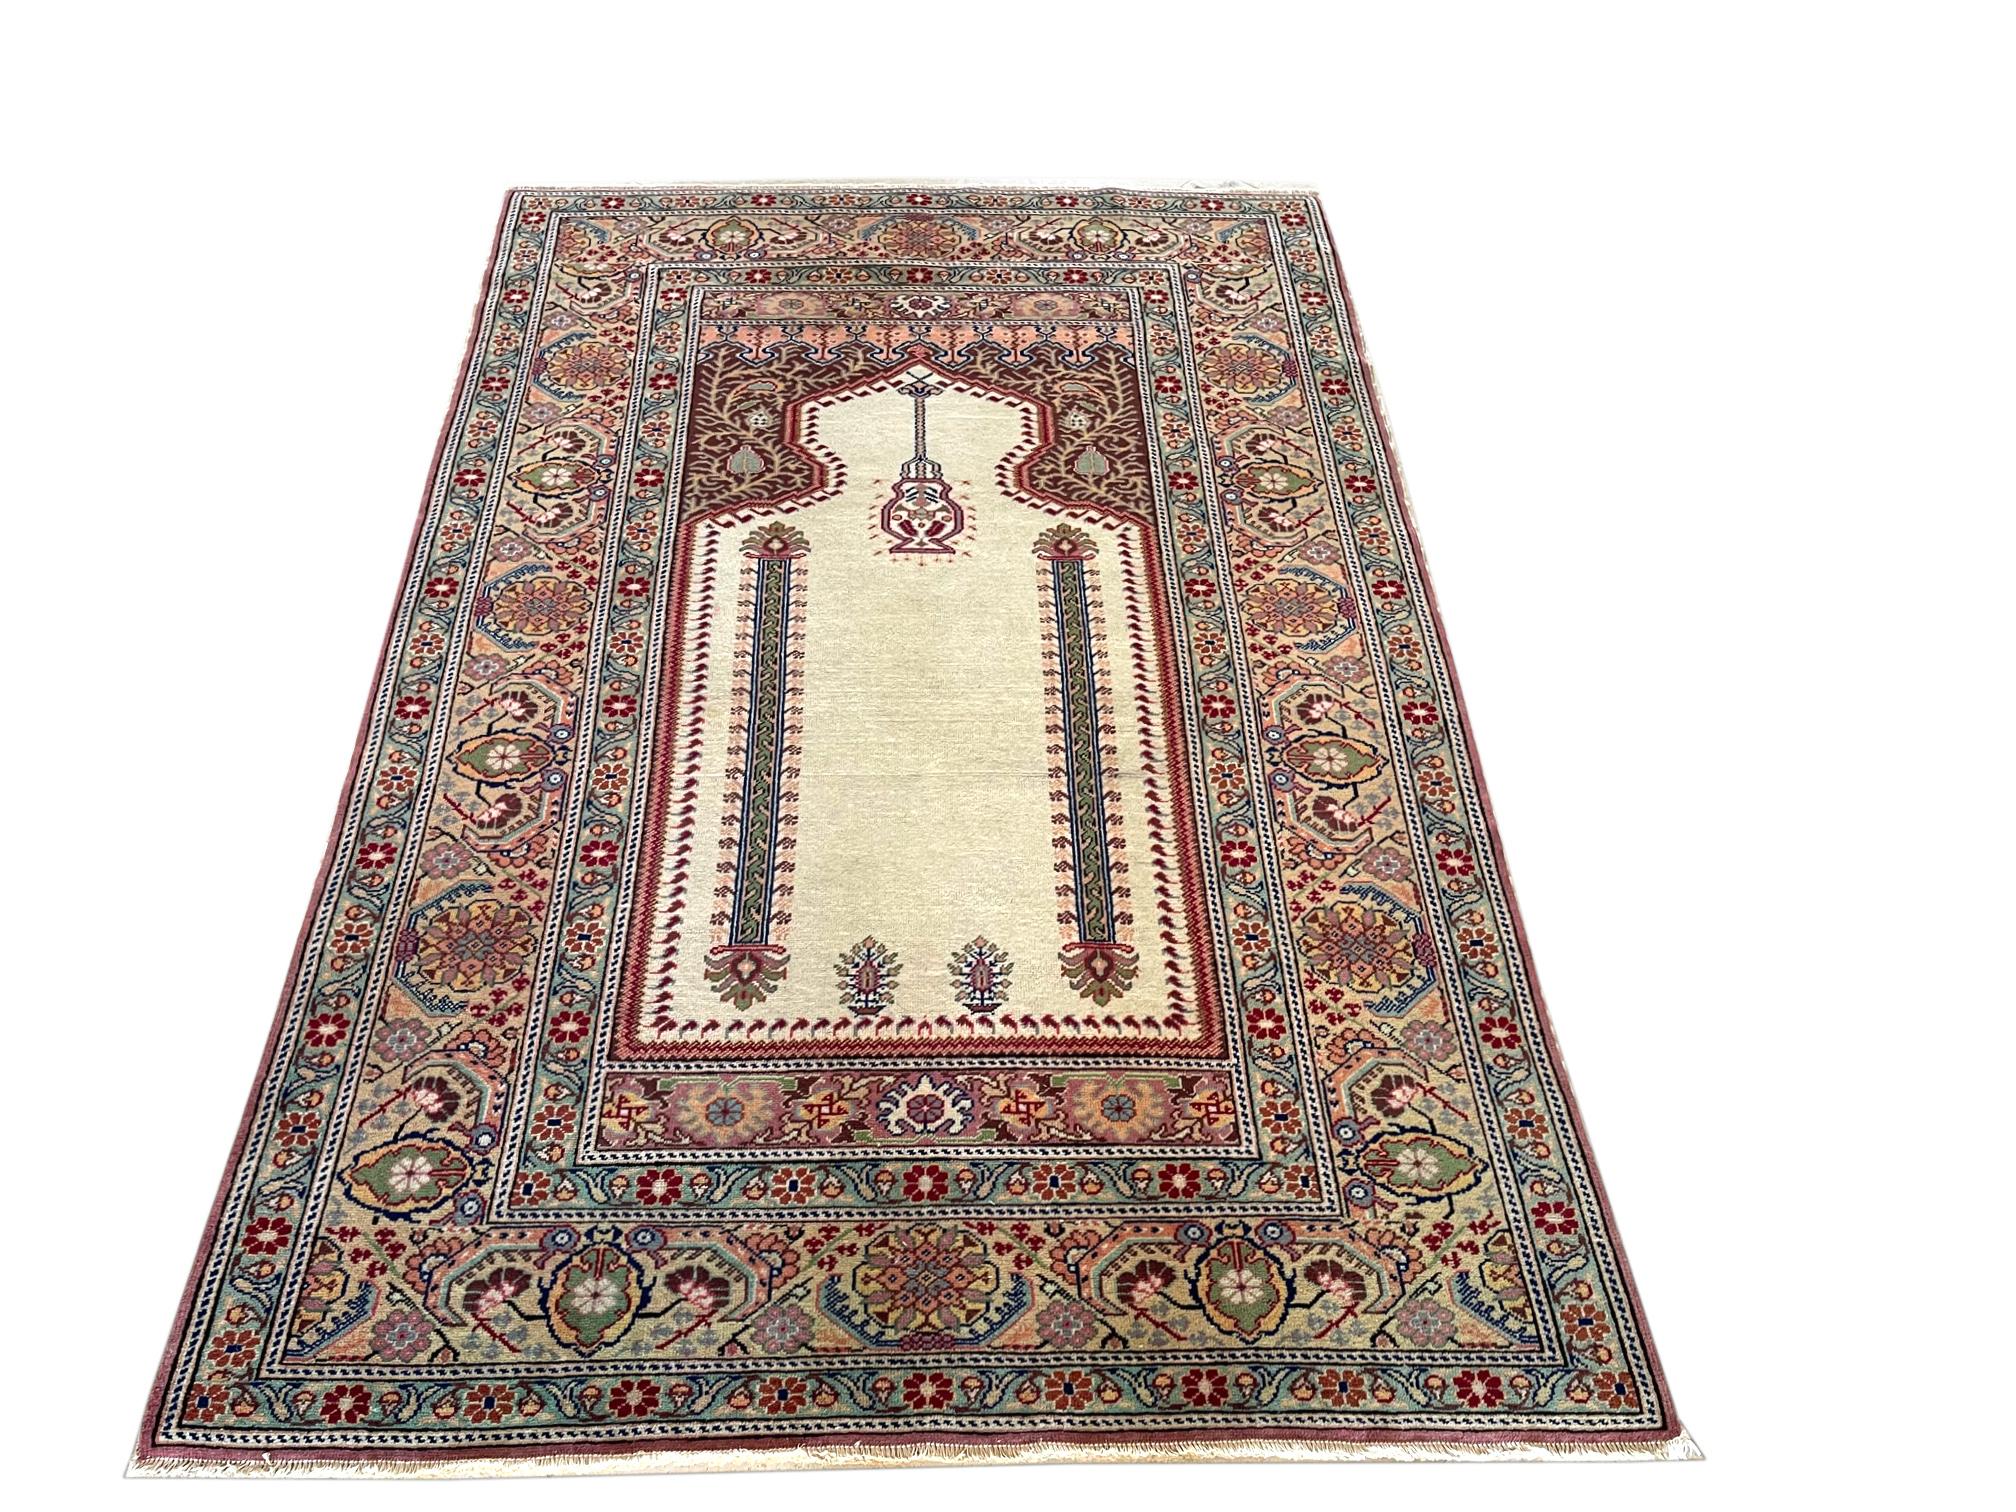 This authentic Hand woven rug is from Turkish Anatolia which is known for their great quality of handmade rugs. This unique rug has wool pile and cotton foundation. This is a prayer rug A great example of prayer rug tradition with artistically